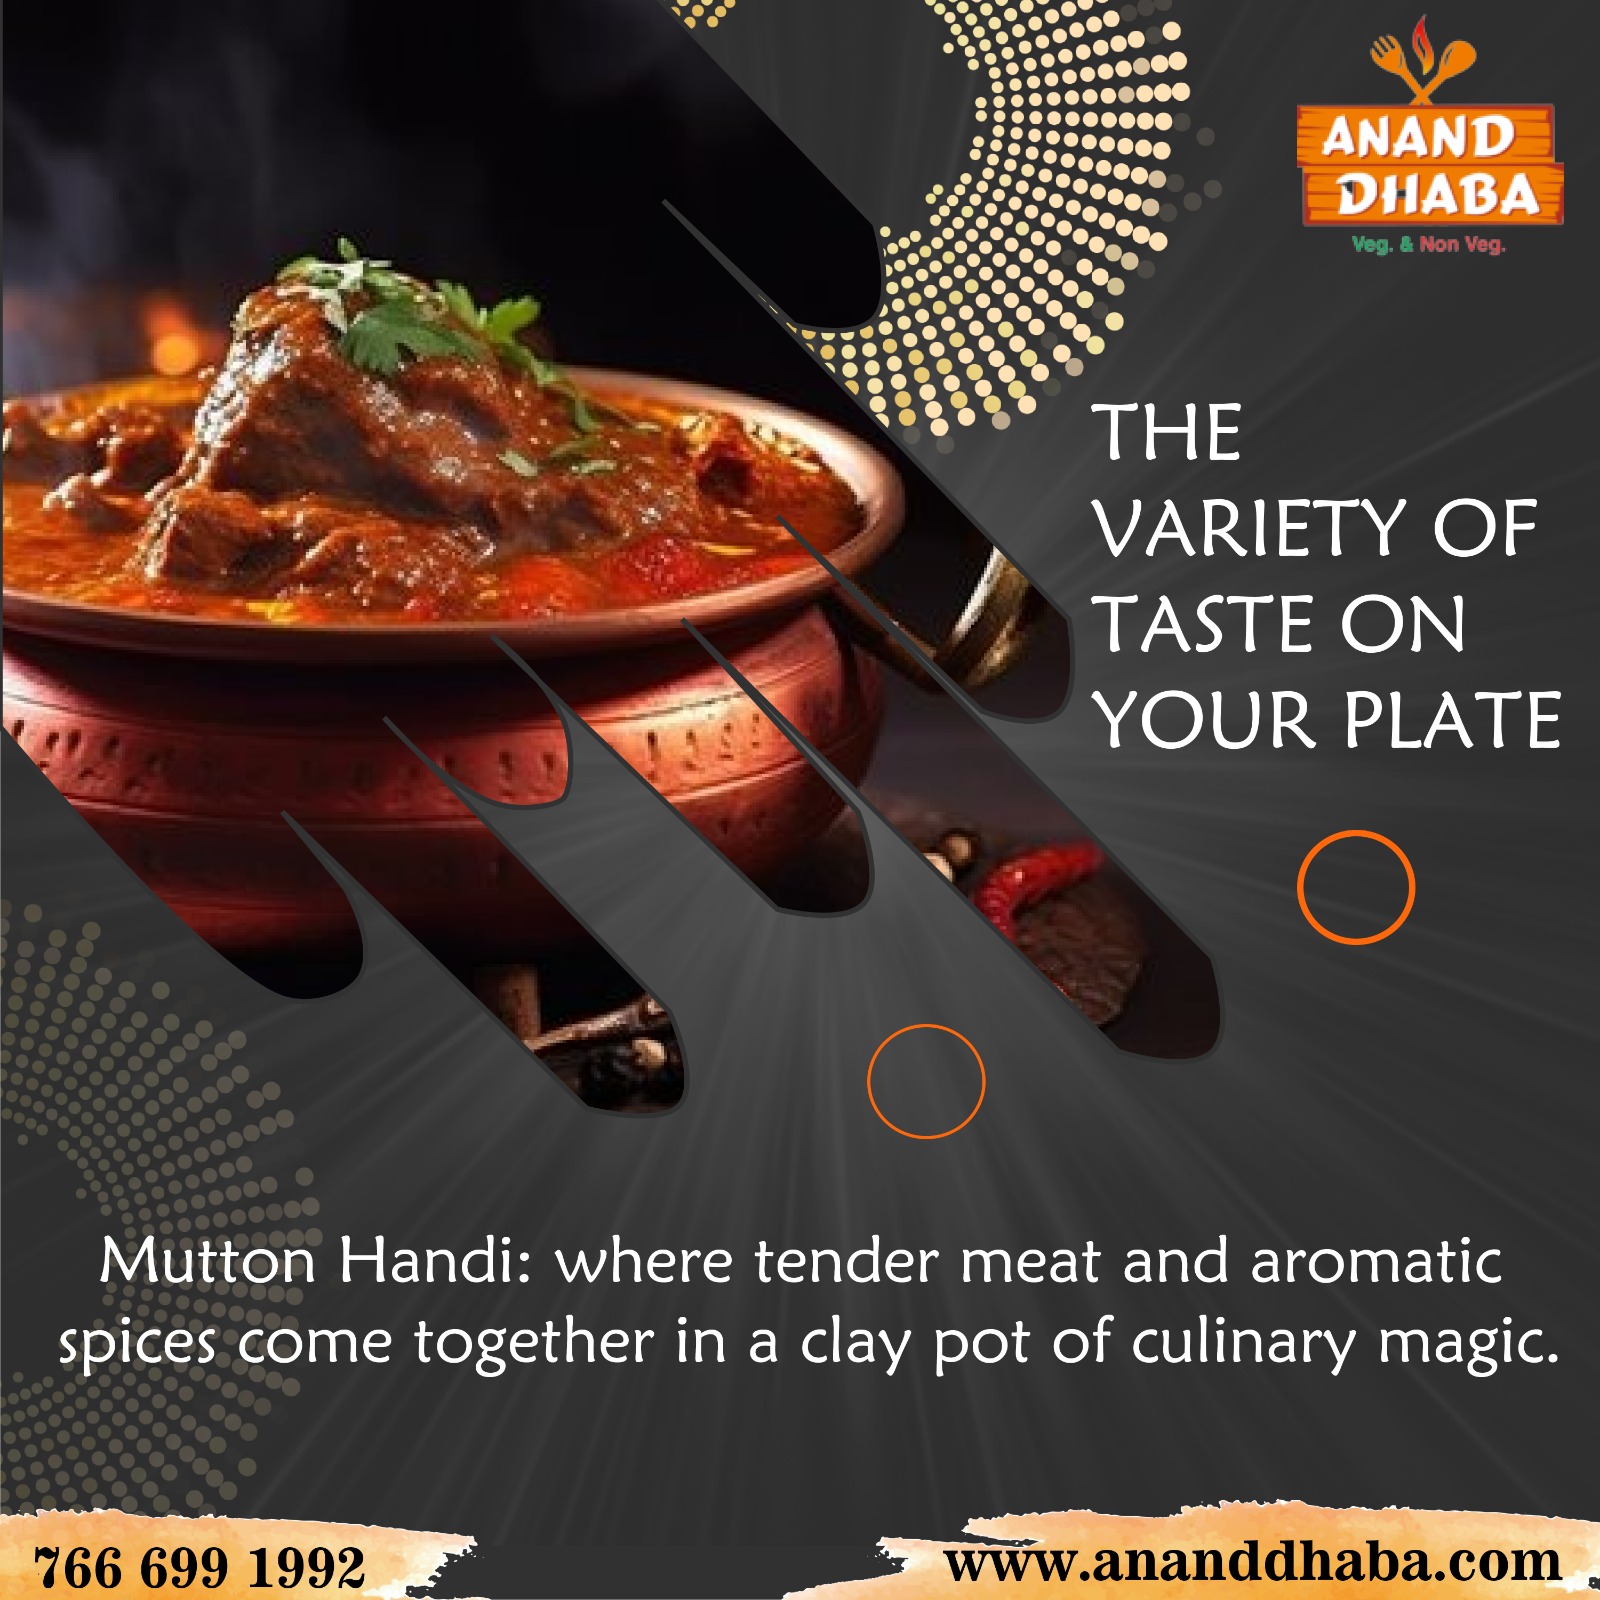 Experience the magic of our Mutton Handi